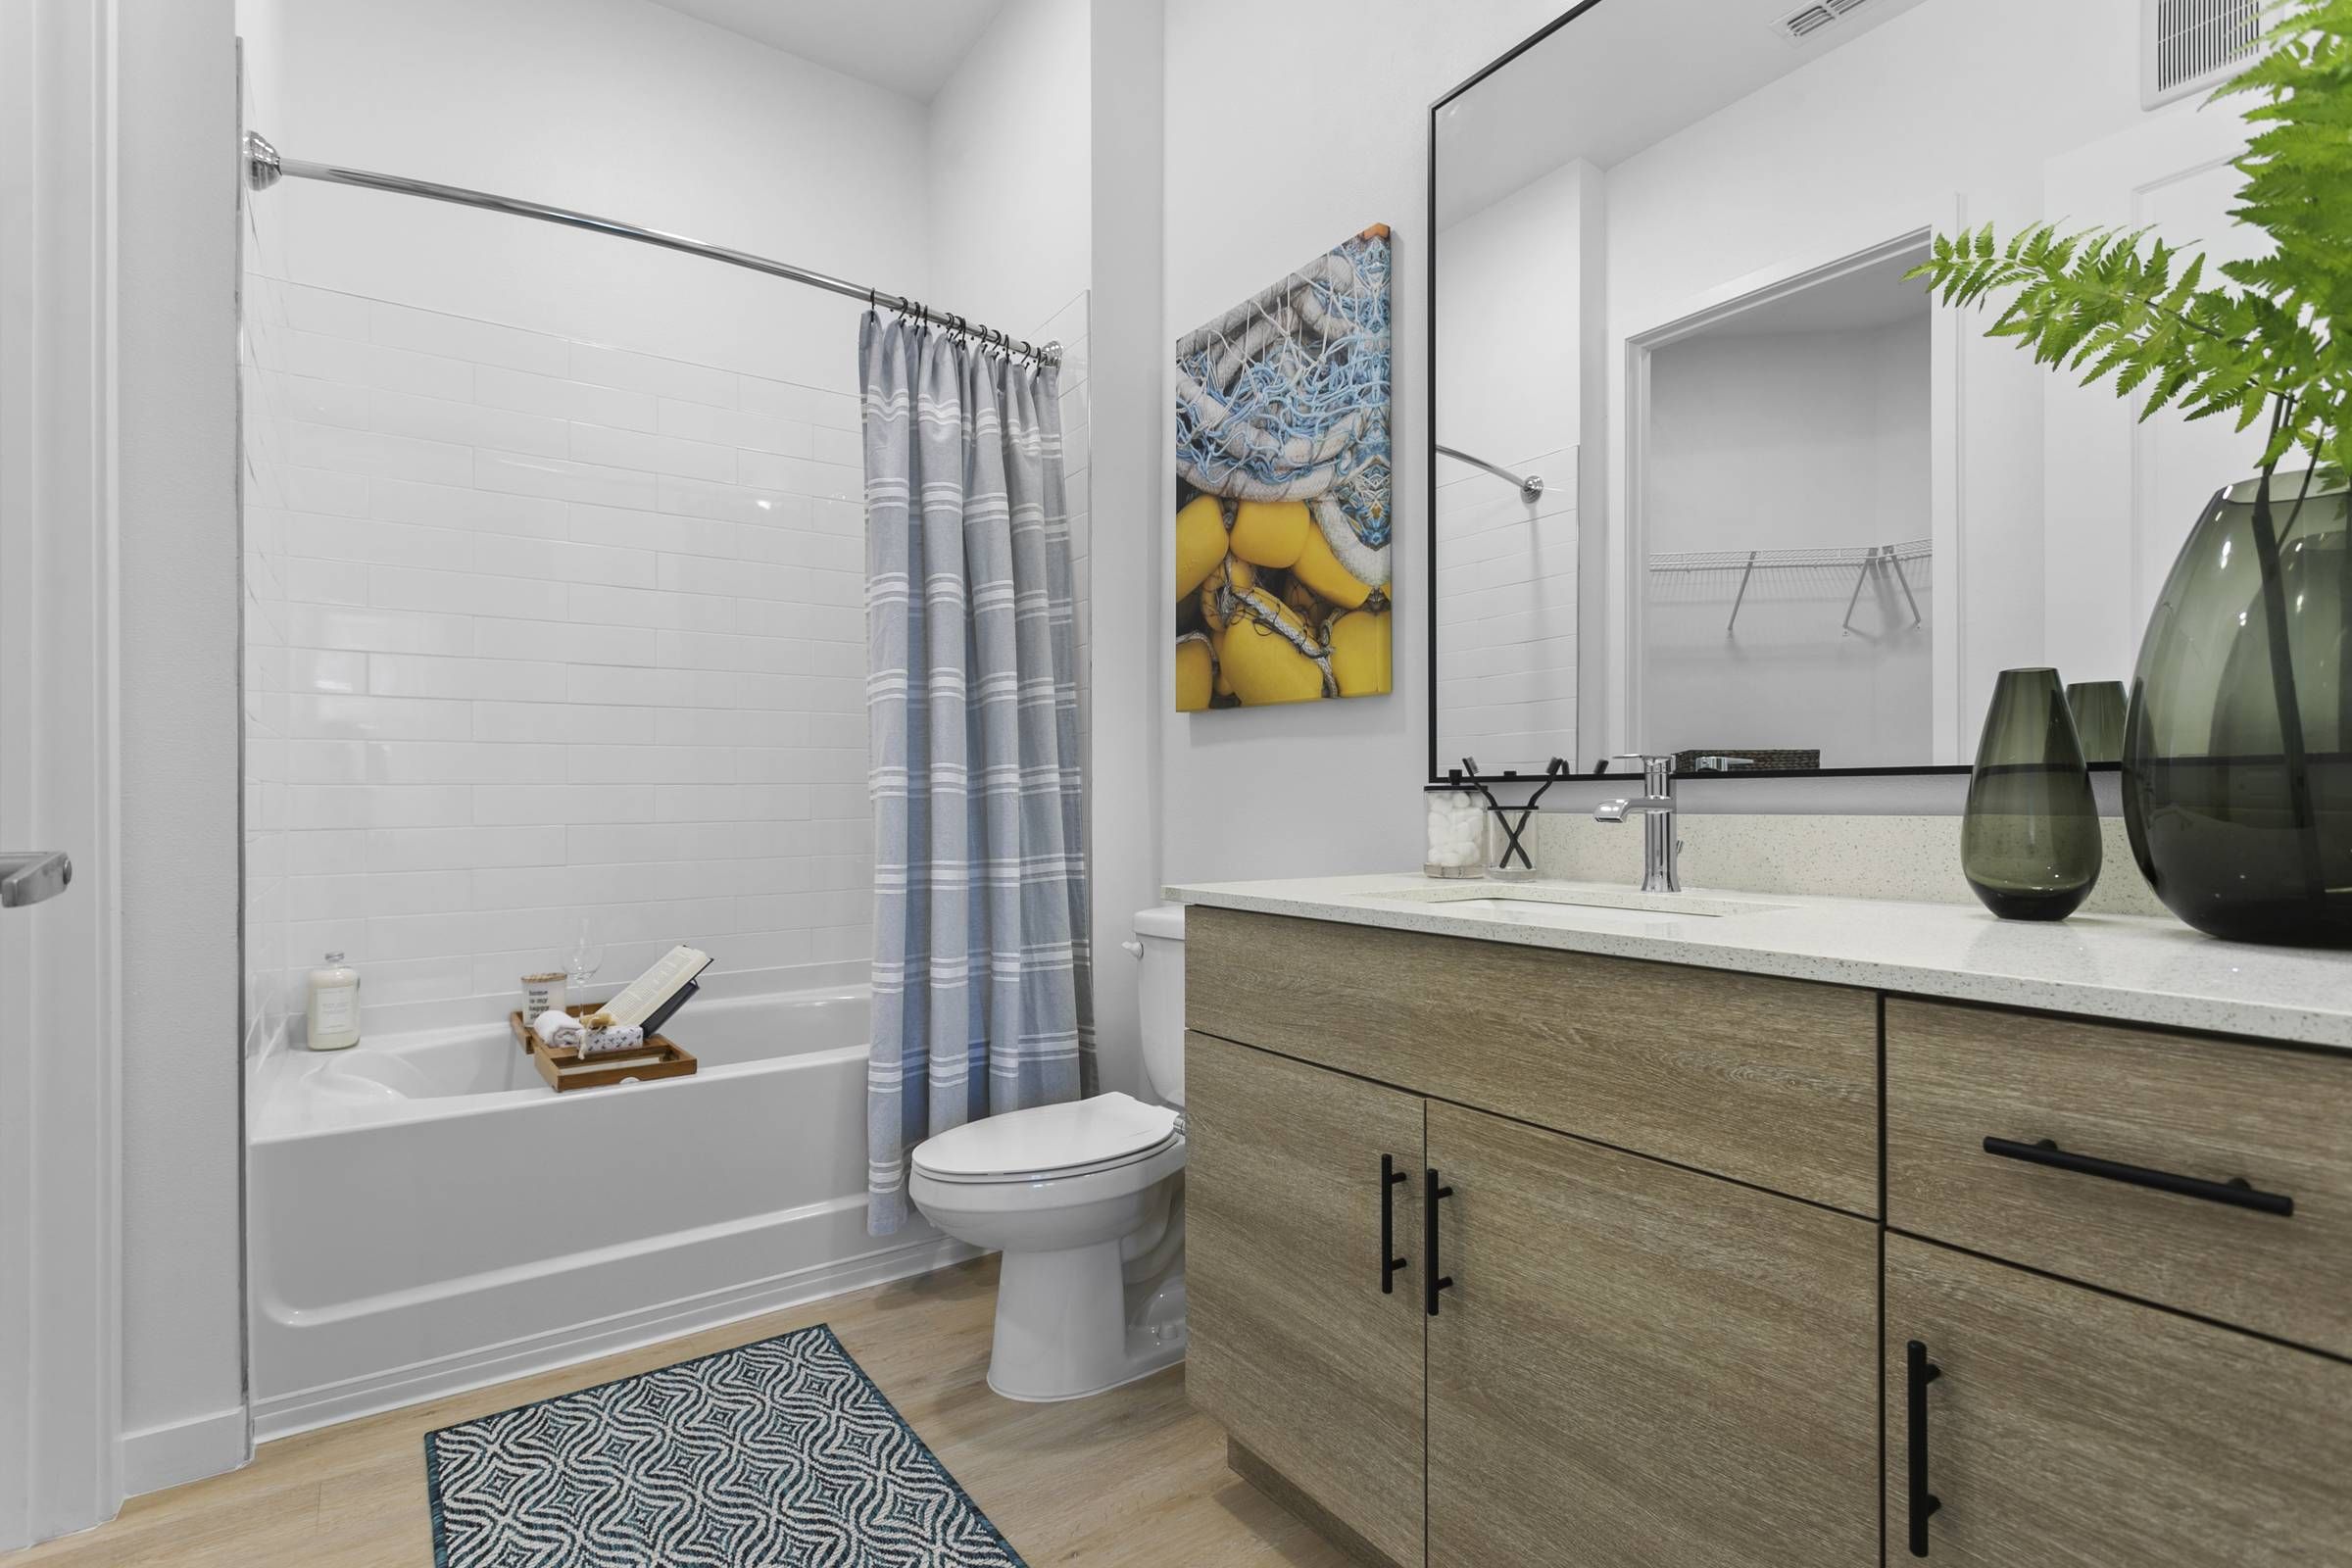 The Alta Clearwater bathroom features a spacious white-tiled shower, gray vanity with modern fixtures, and a colorful wall art of a yellow buoy.